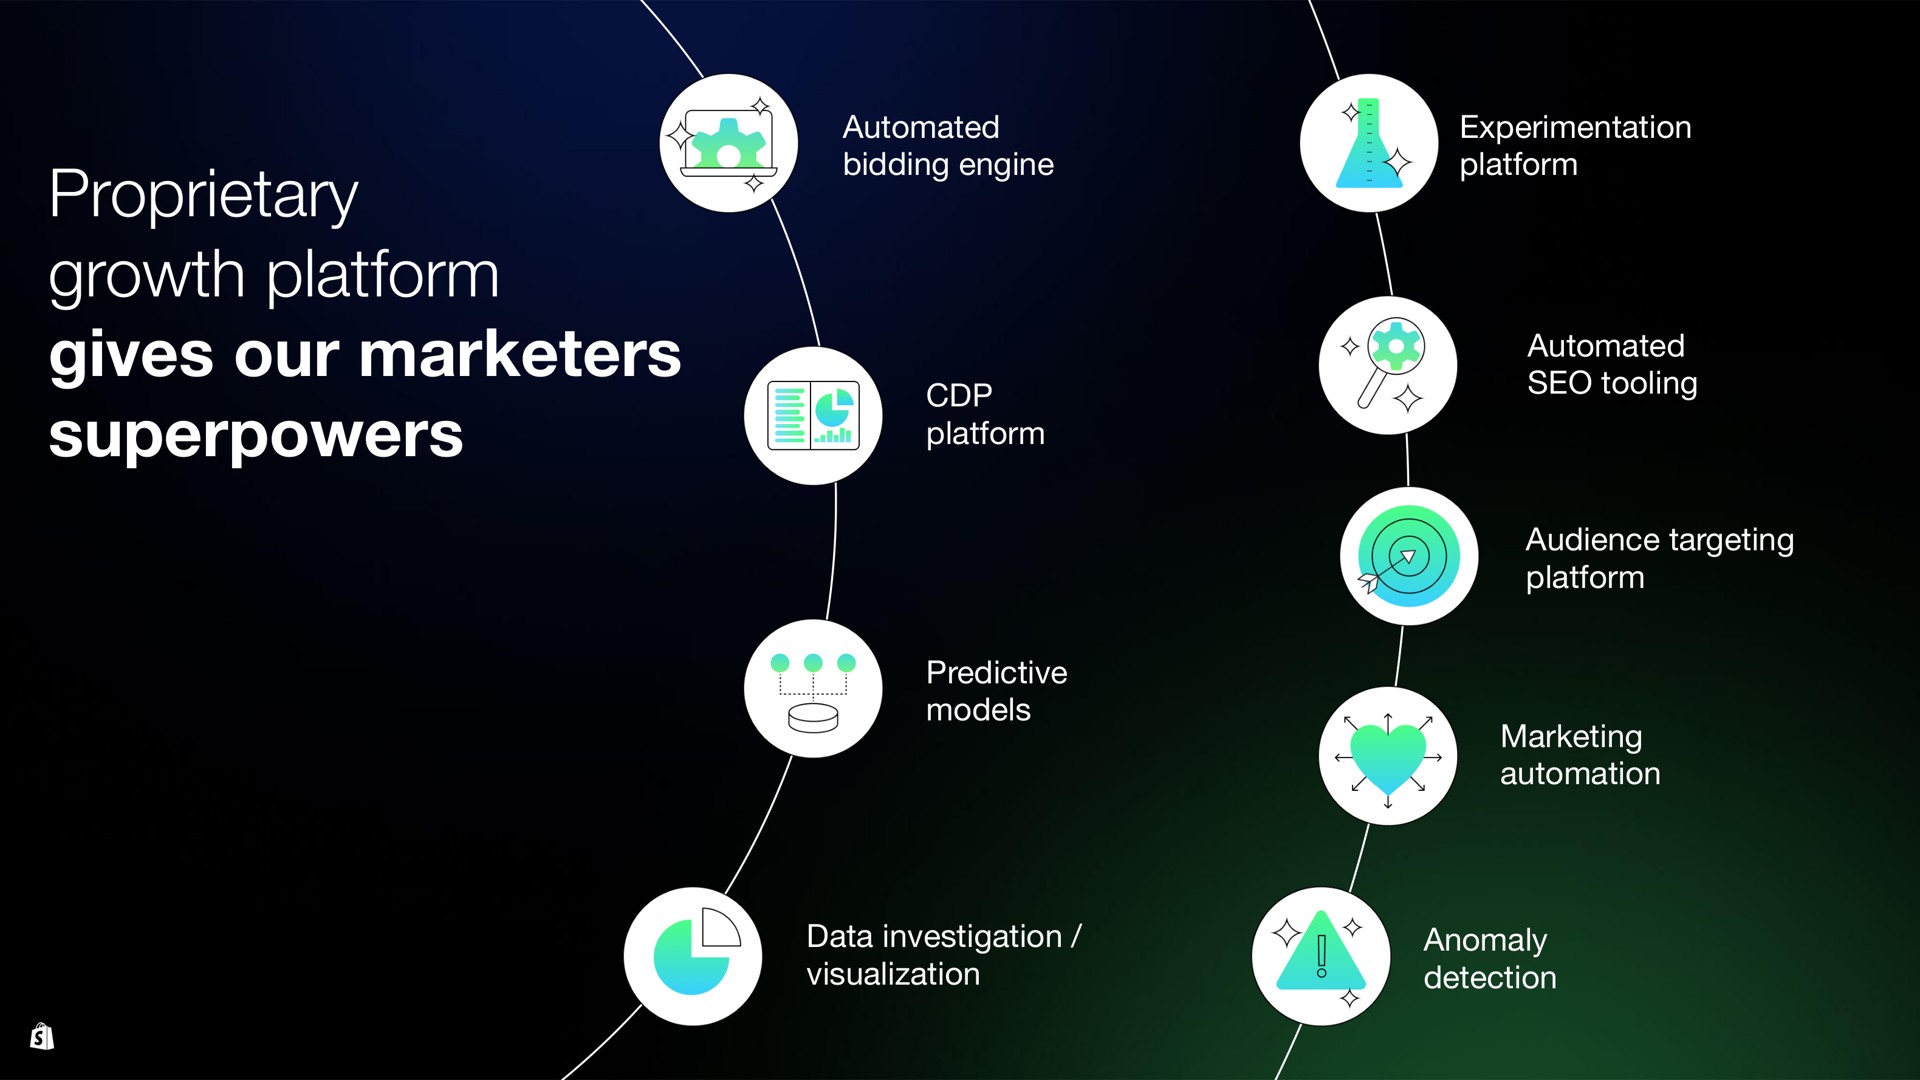 proprietary growth platform gives our marketers superpowers i | Shopify